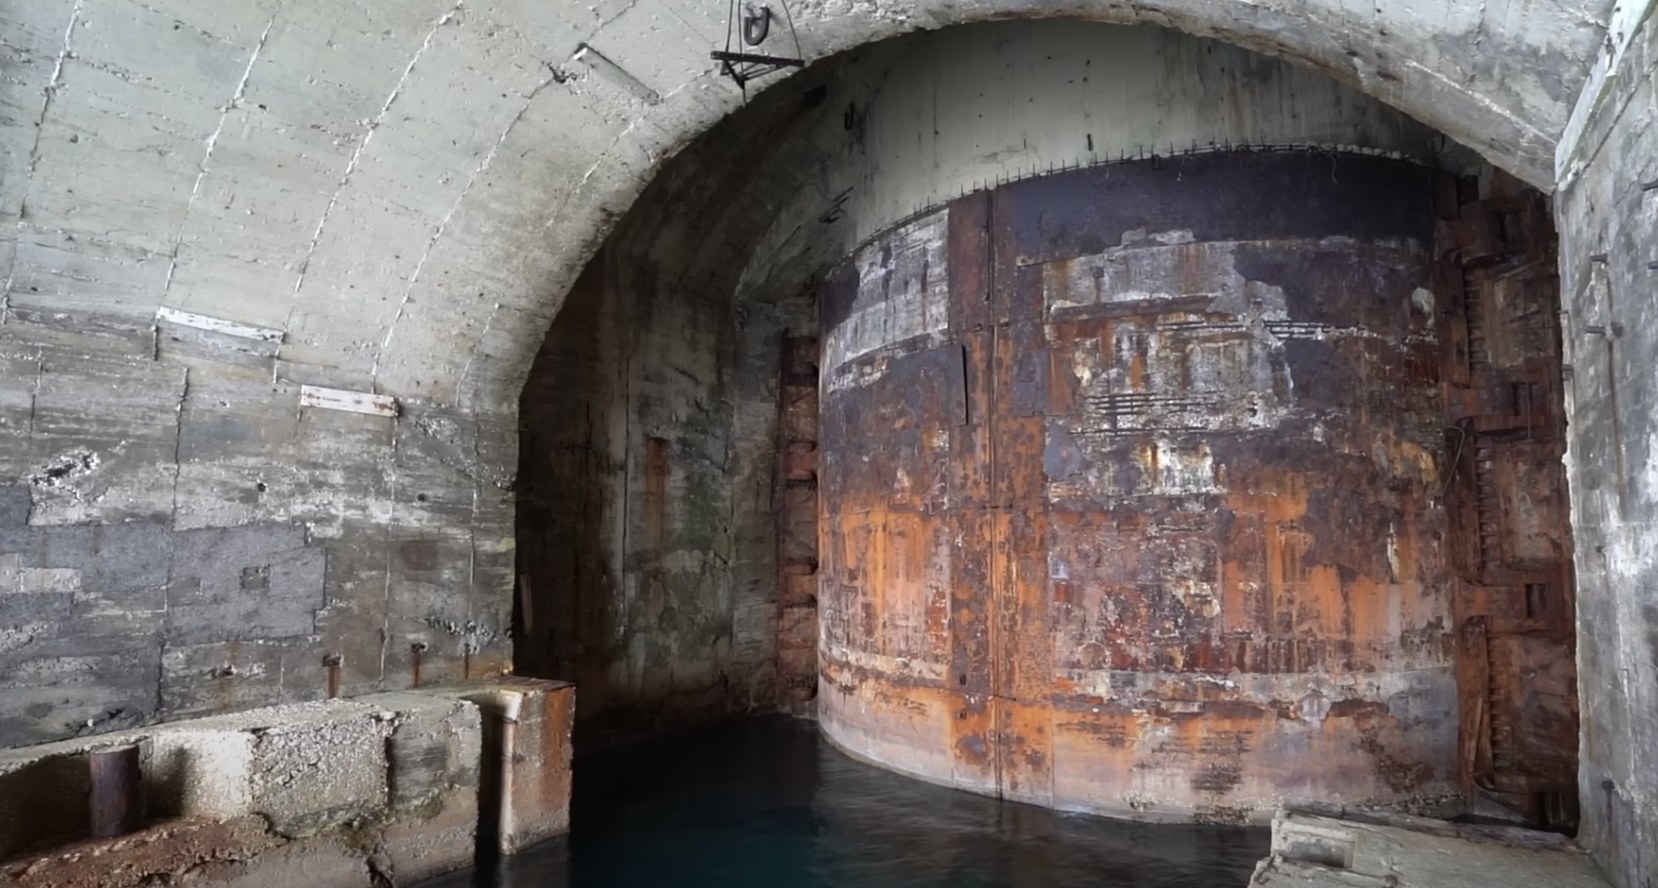 A U-Boat entrance and rusted walls